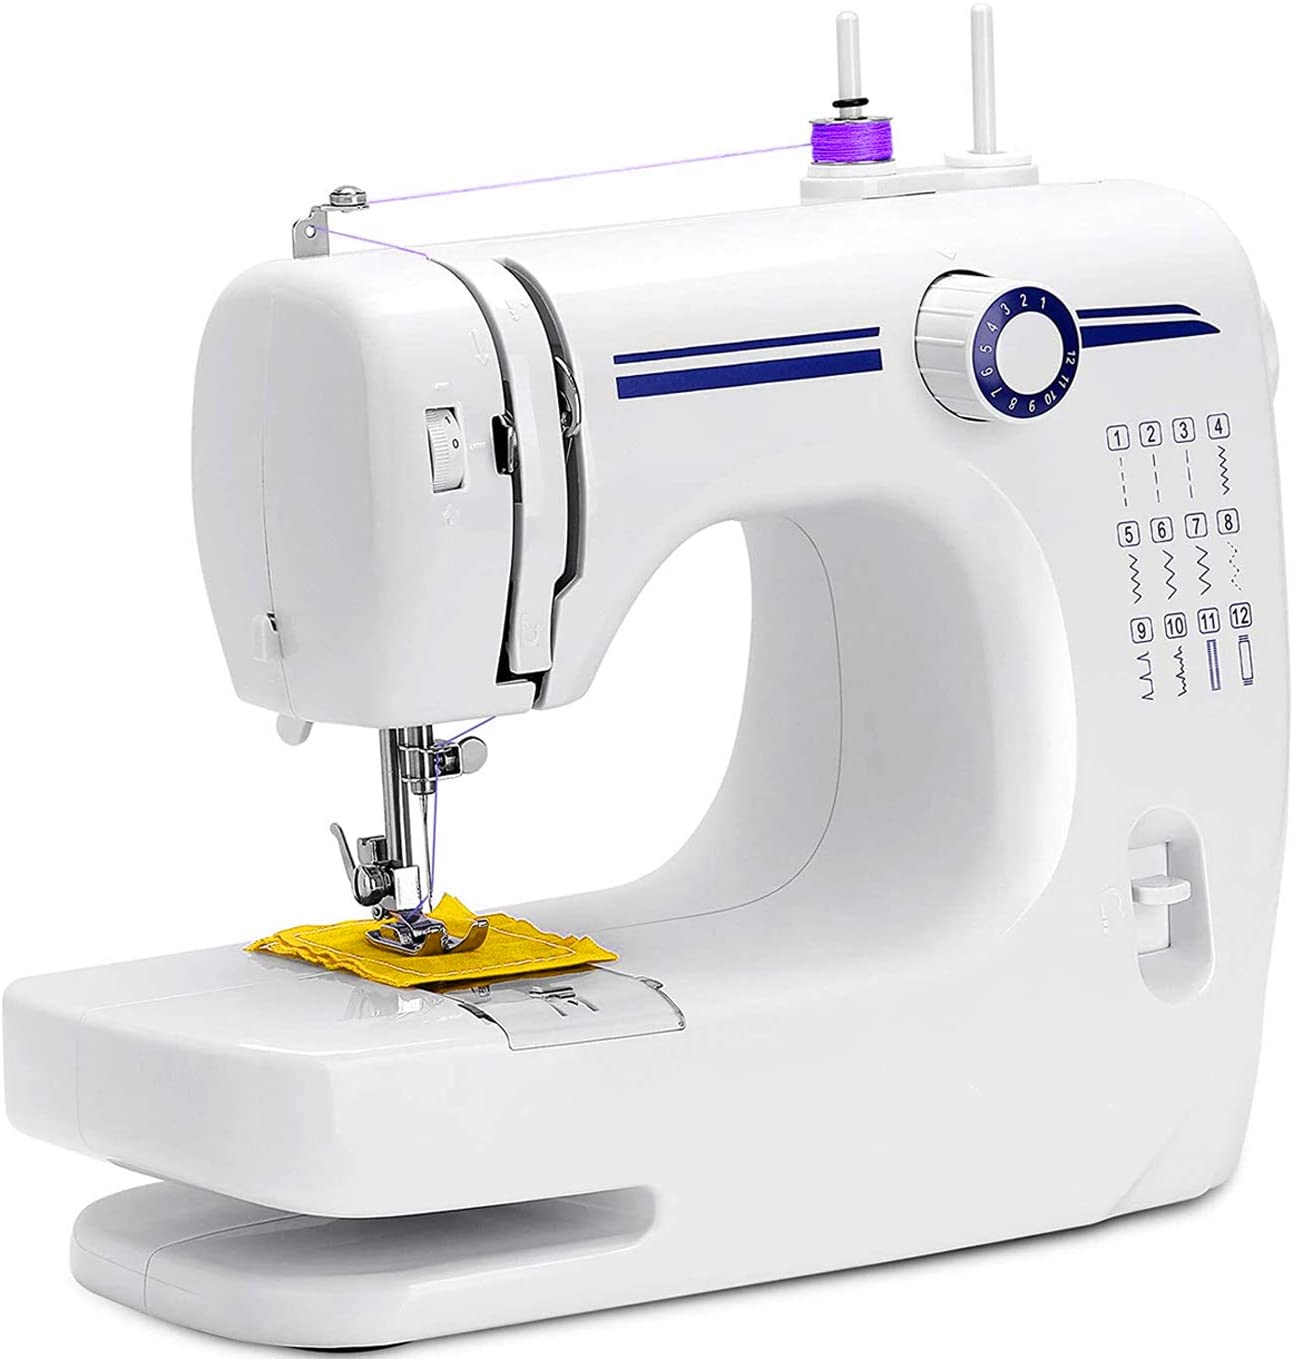 household-sewing-machine-1